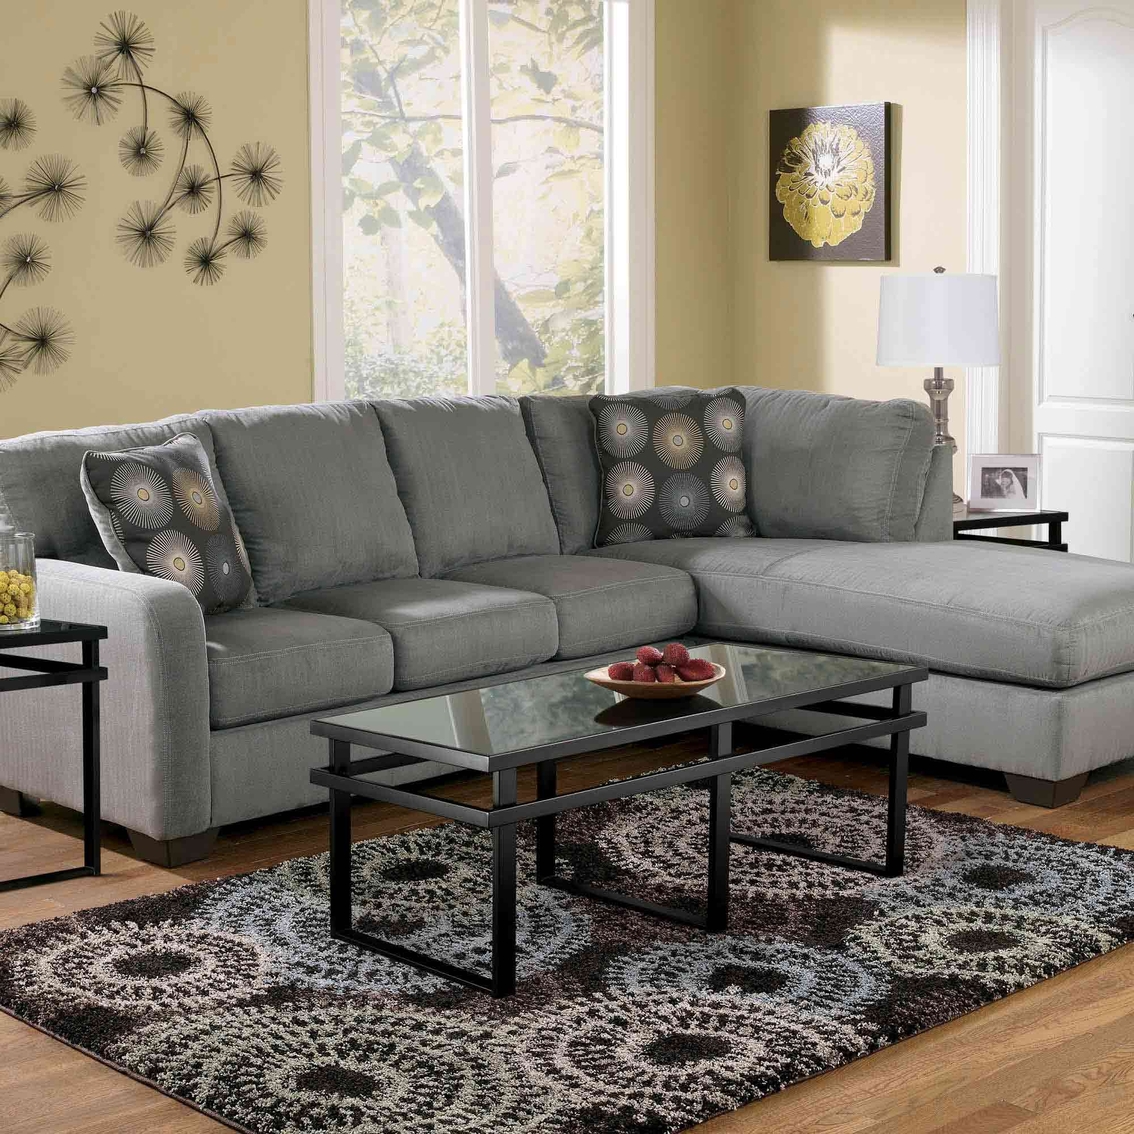 Signature Design by Ashley Zella 2 pc. Sectional RAF Corner Chaise/LAF Sofa - Image 2 of 2